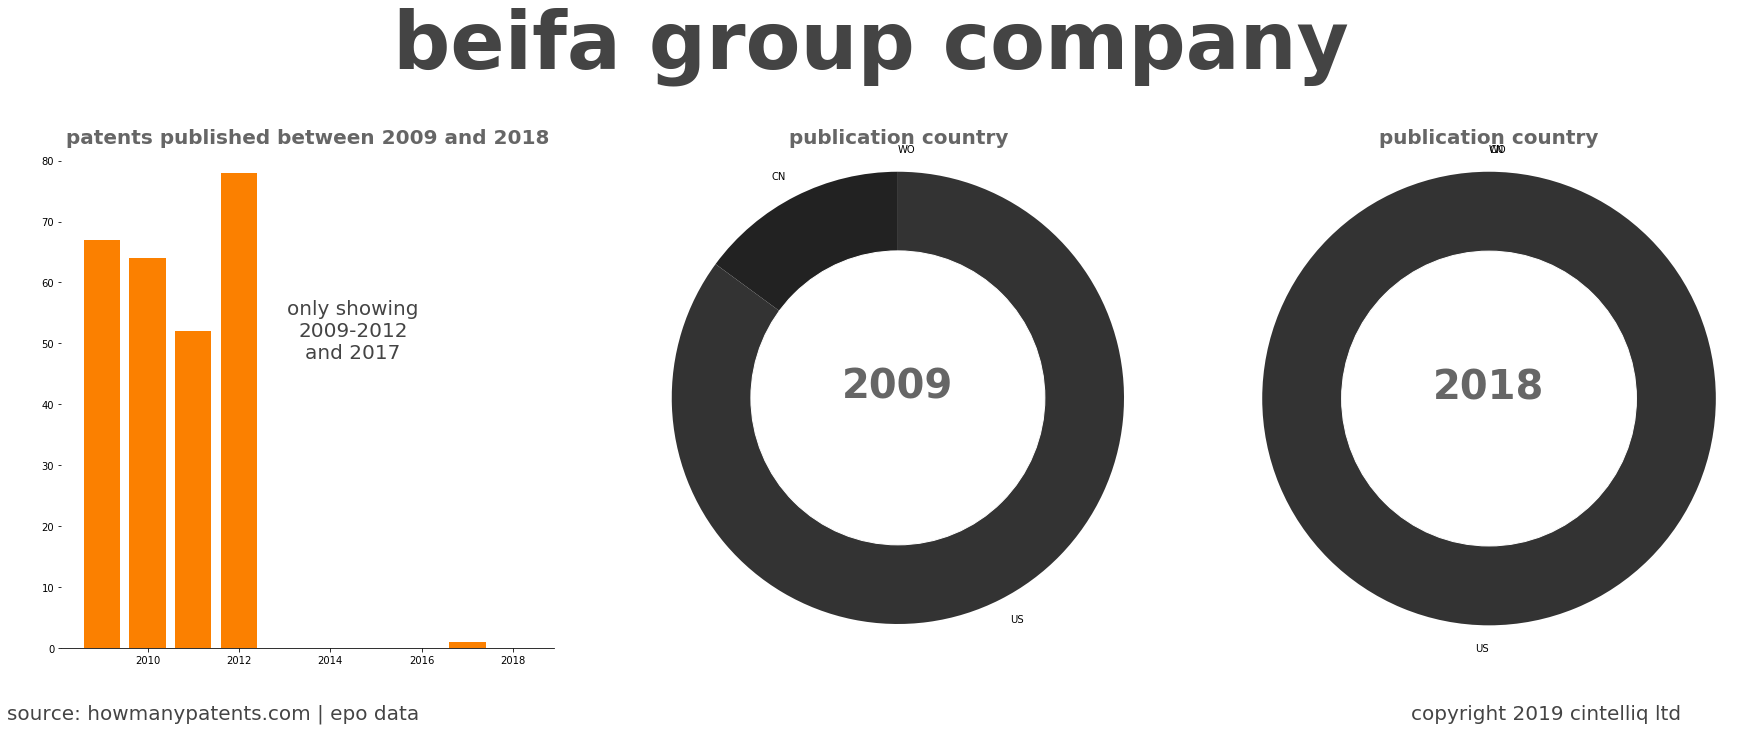 summary of patents for Beifa Group Company